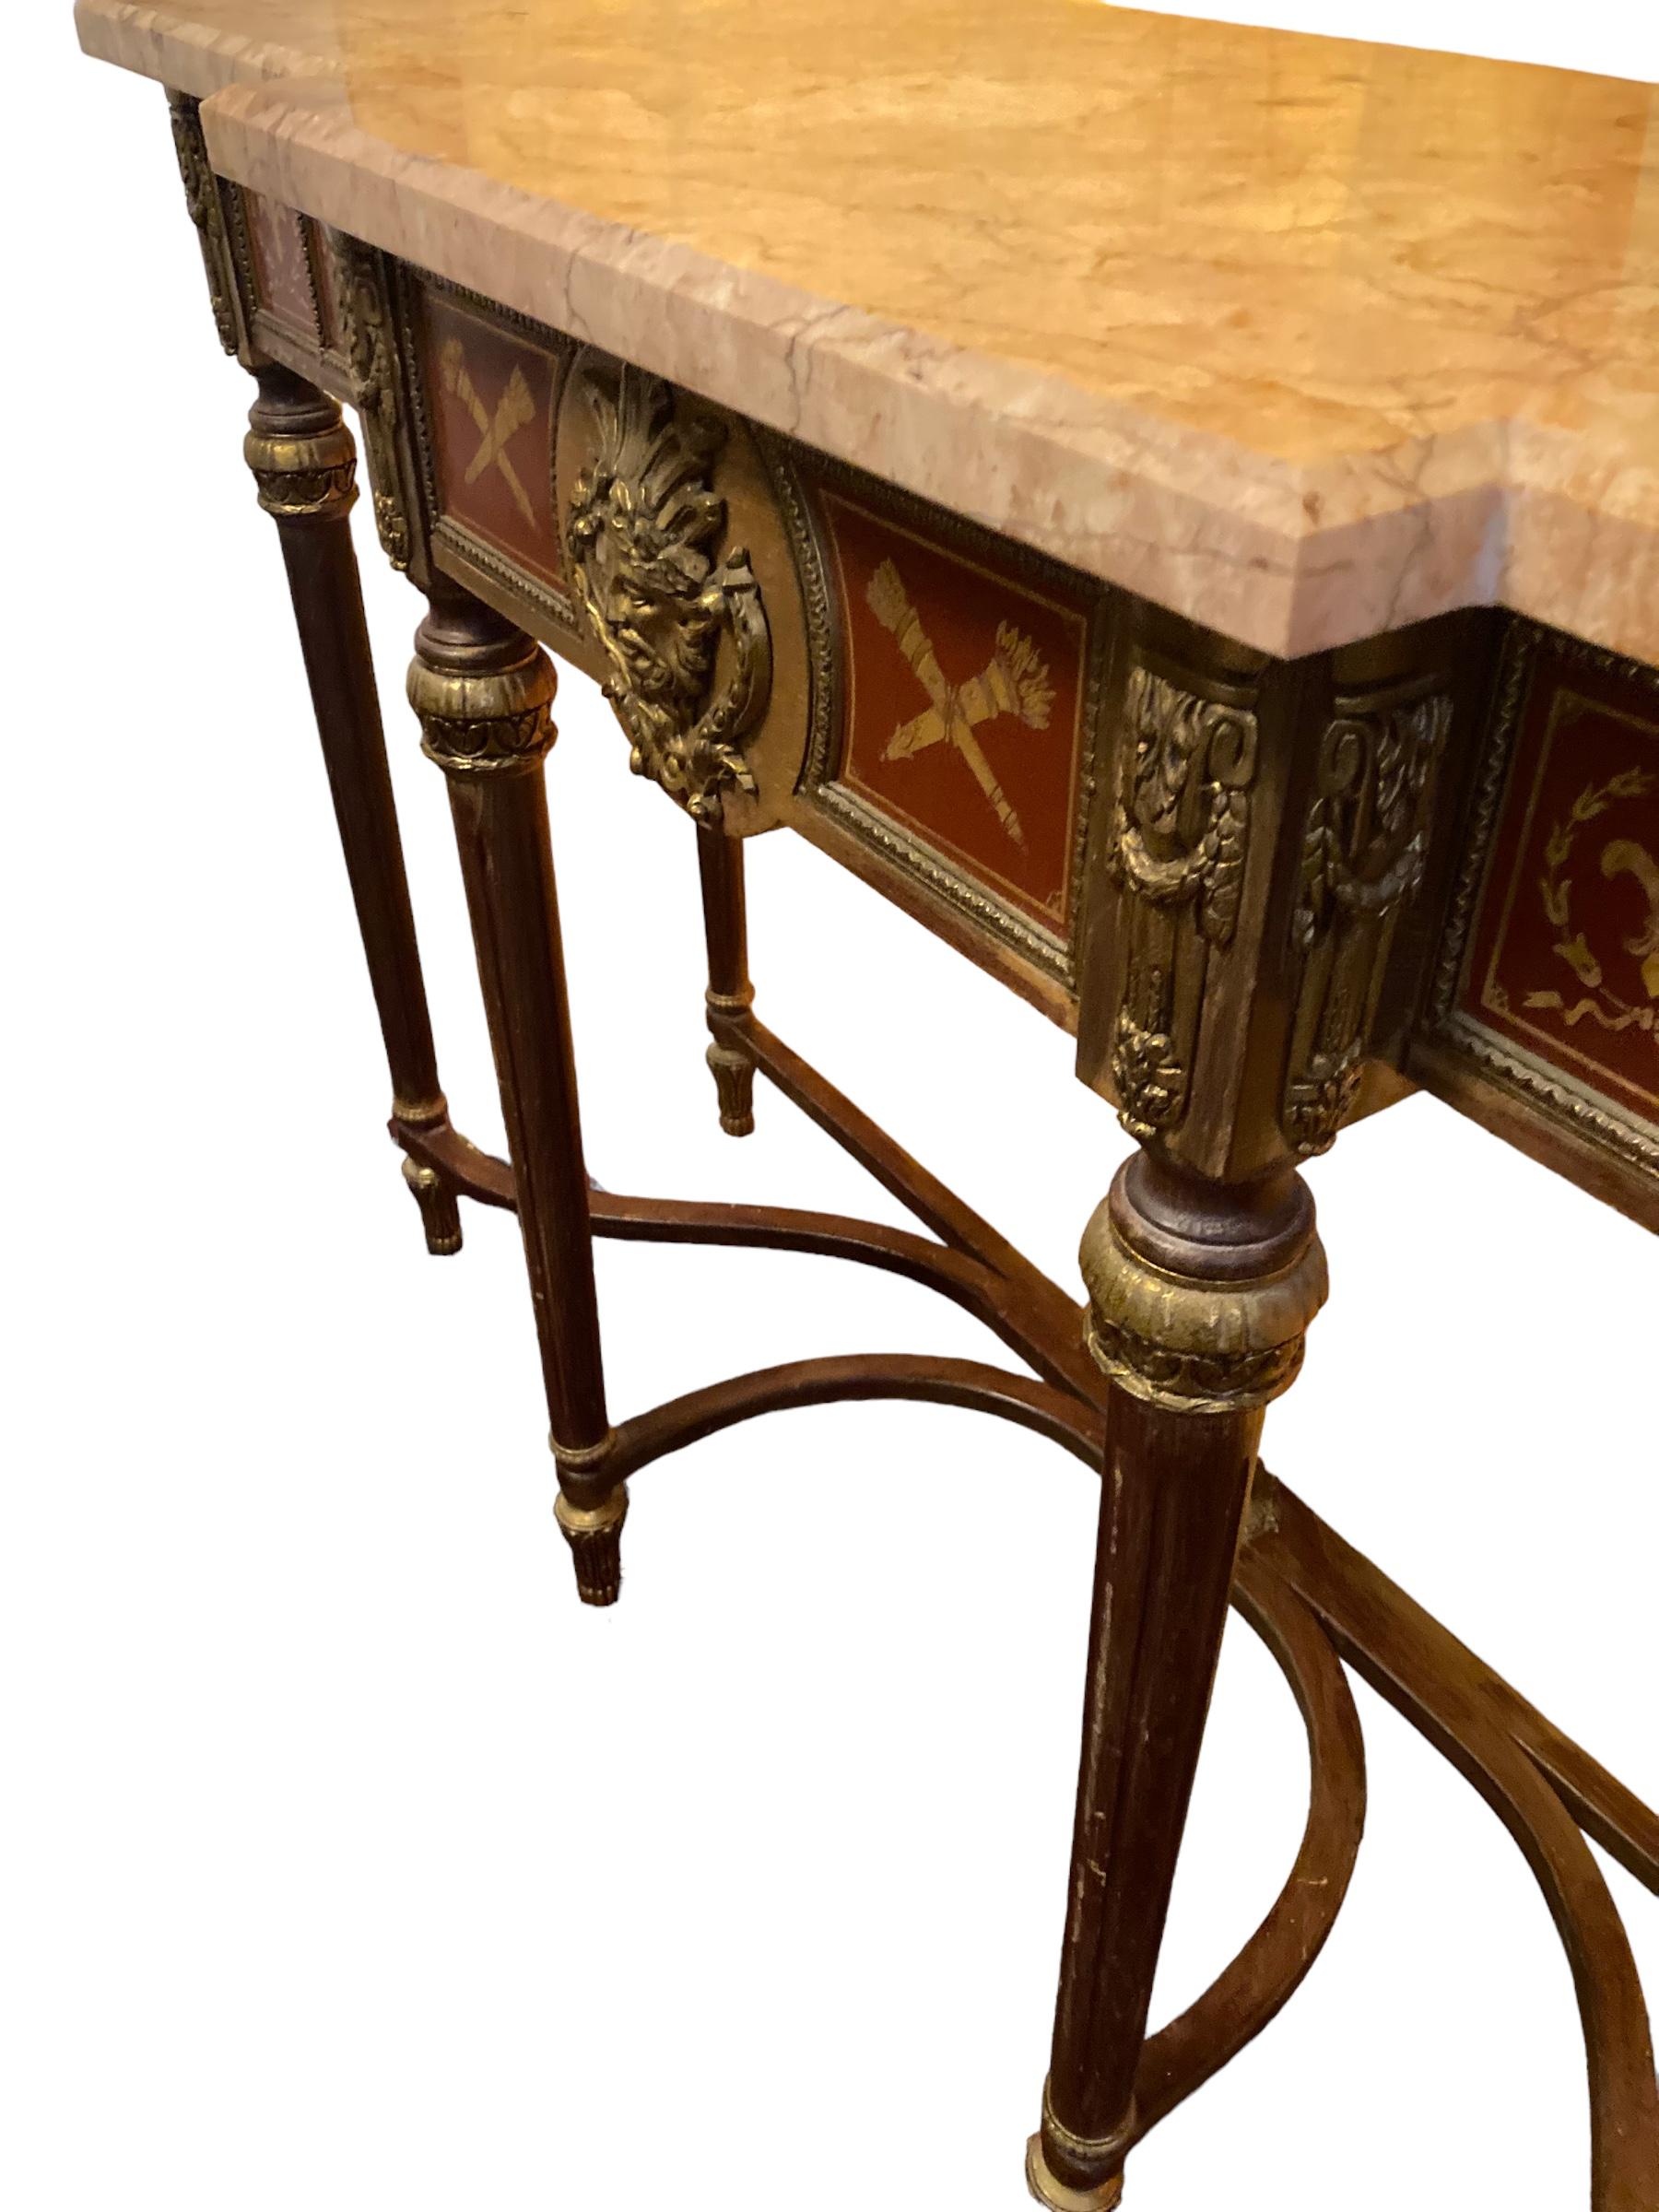 Louis XVI Revival Style Console Table by H & L Epstein, solid marble top, cast gilt bronze  mounts and feet with decorative bronze head on the single drawer with painted gilt Fleur de lys either side. Serpentine stretchers with central gilt metal